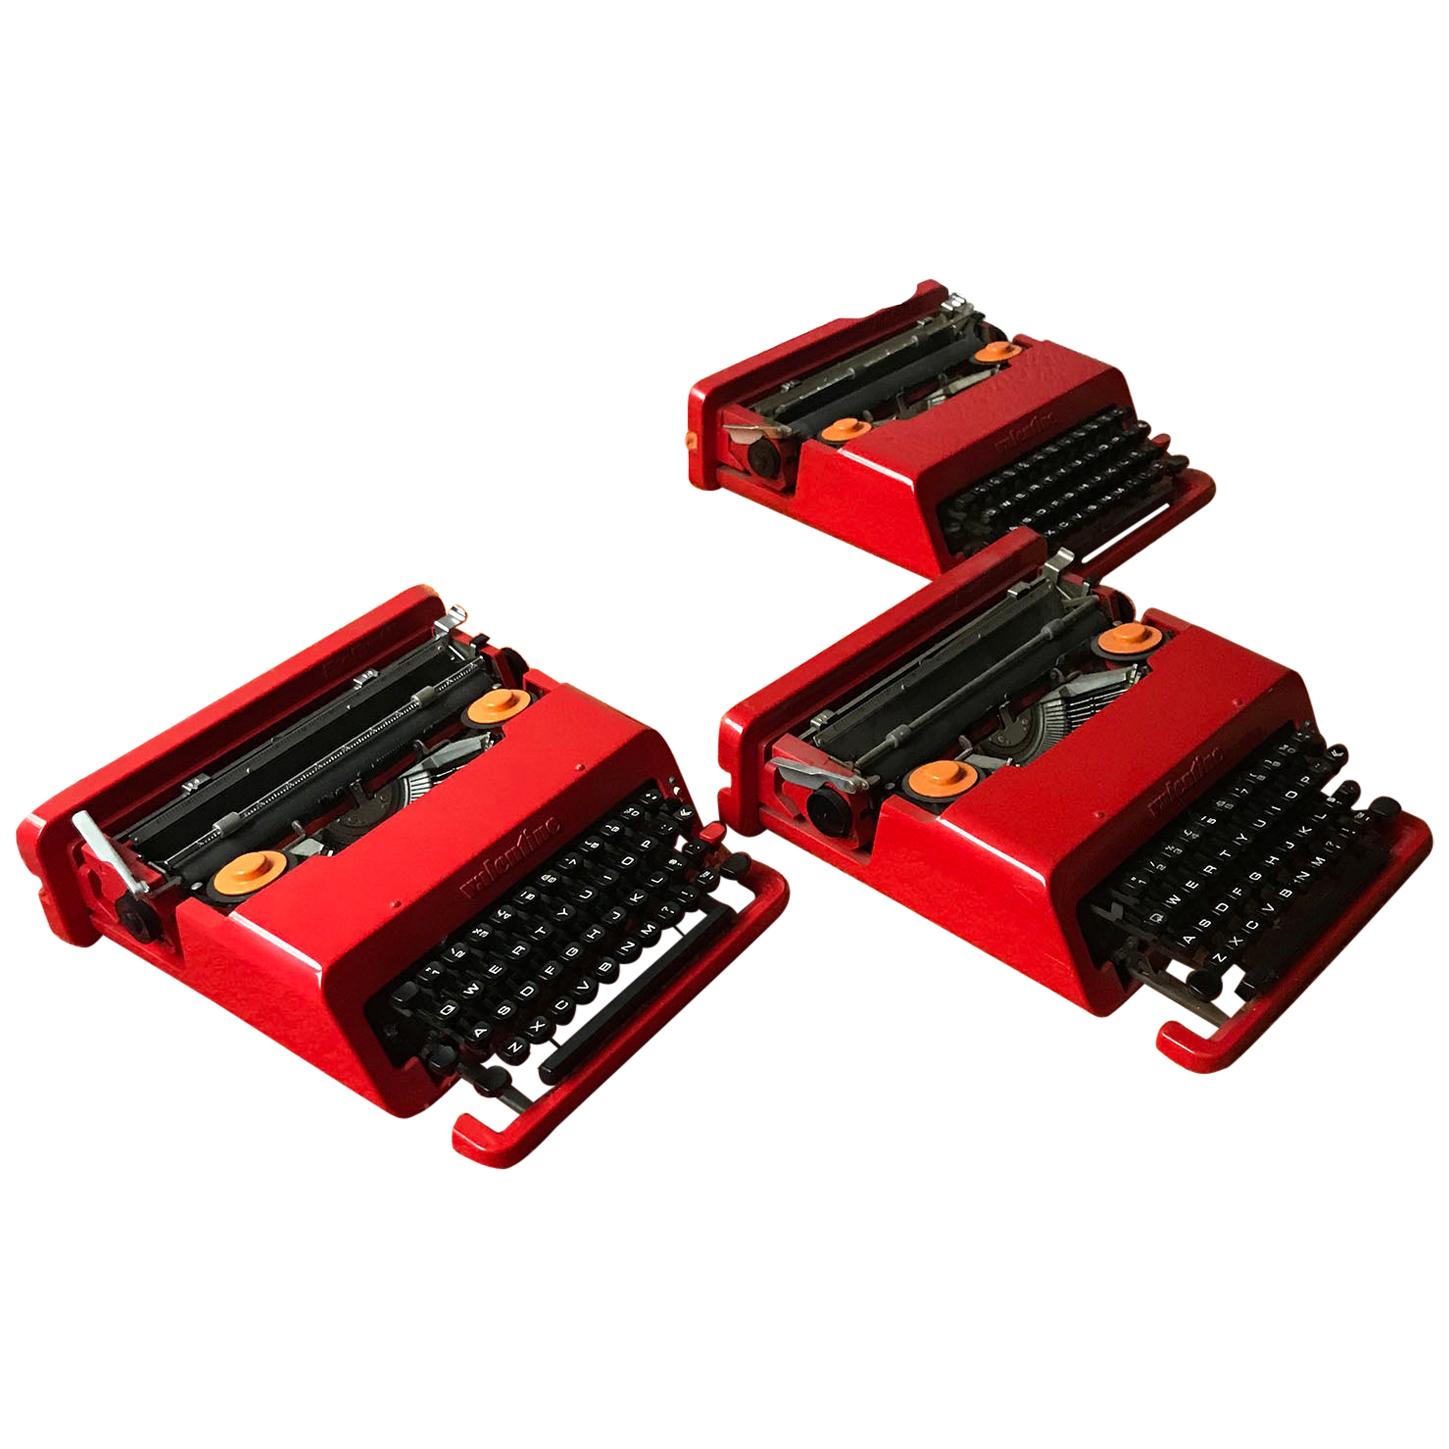 1968, Ettore Sottsas & Perry King for Olivetti, Italy, Red Valentine Typewriter